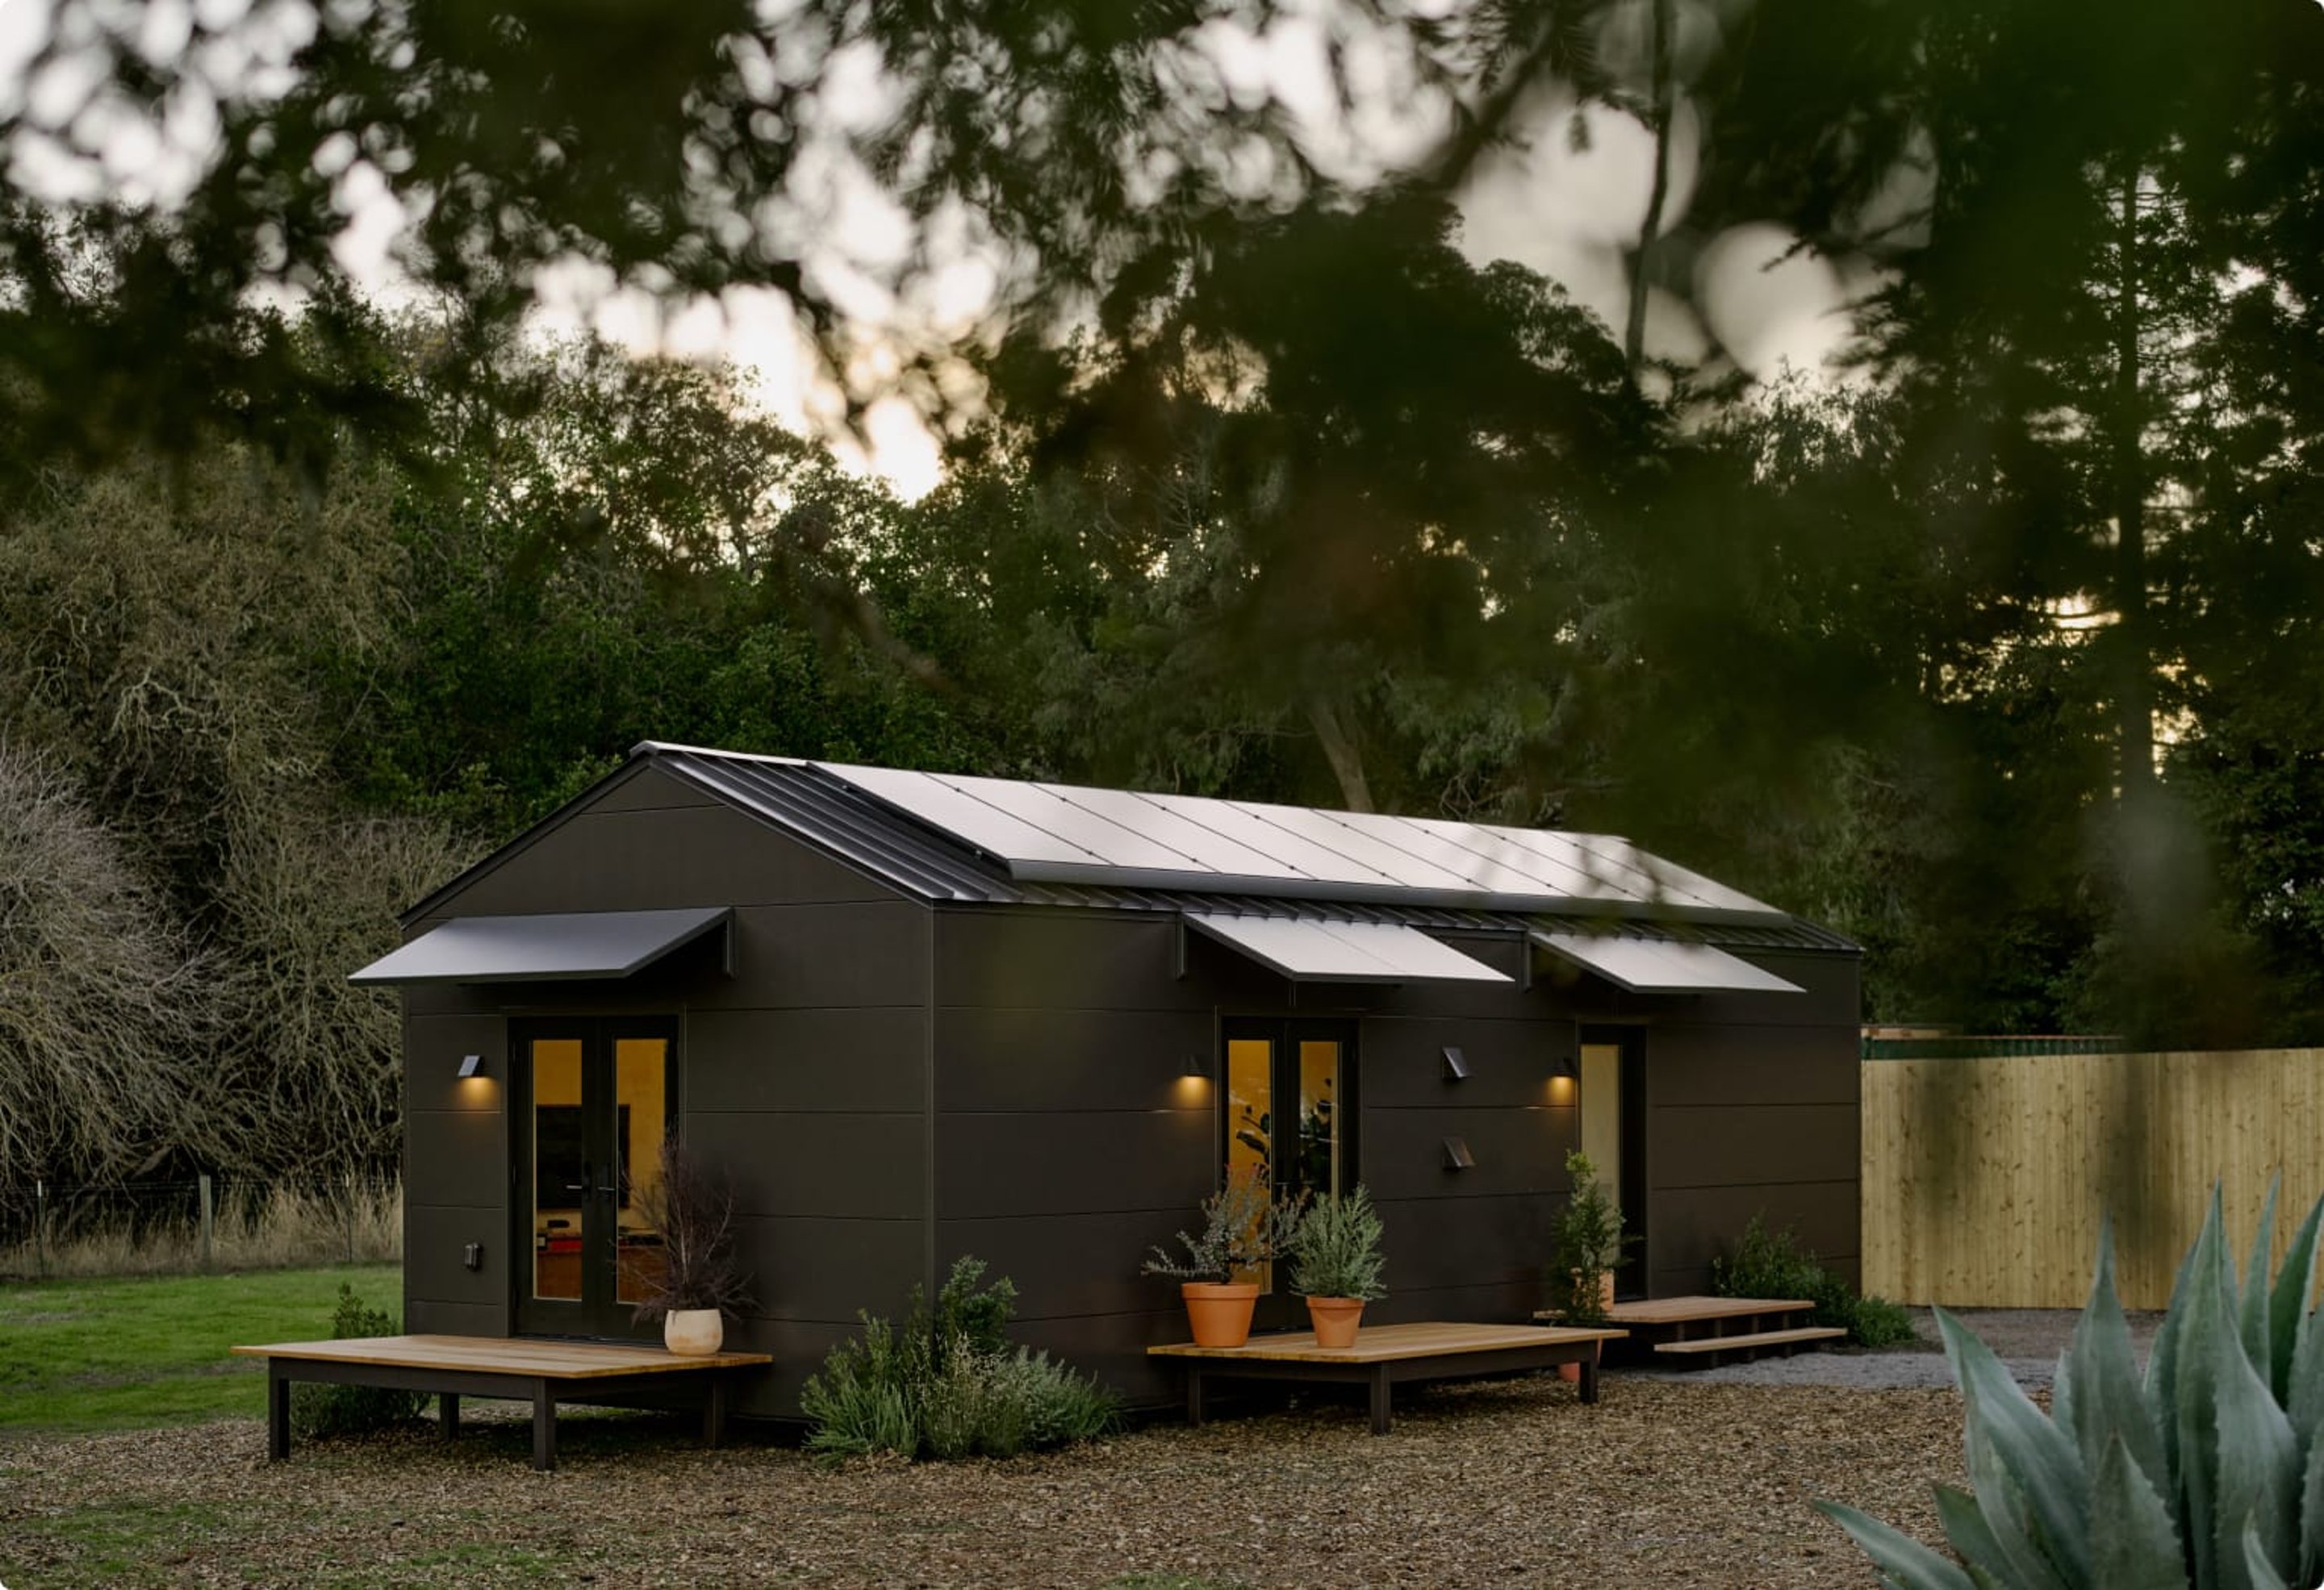 Airbnb Co-founder’s New Business Is Building Small Homes in Backyards